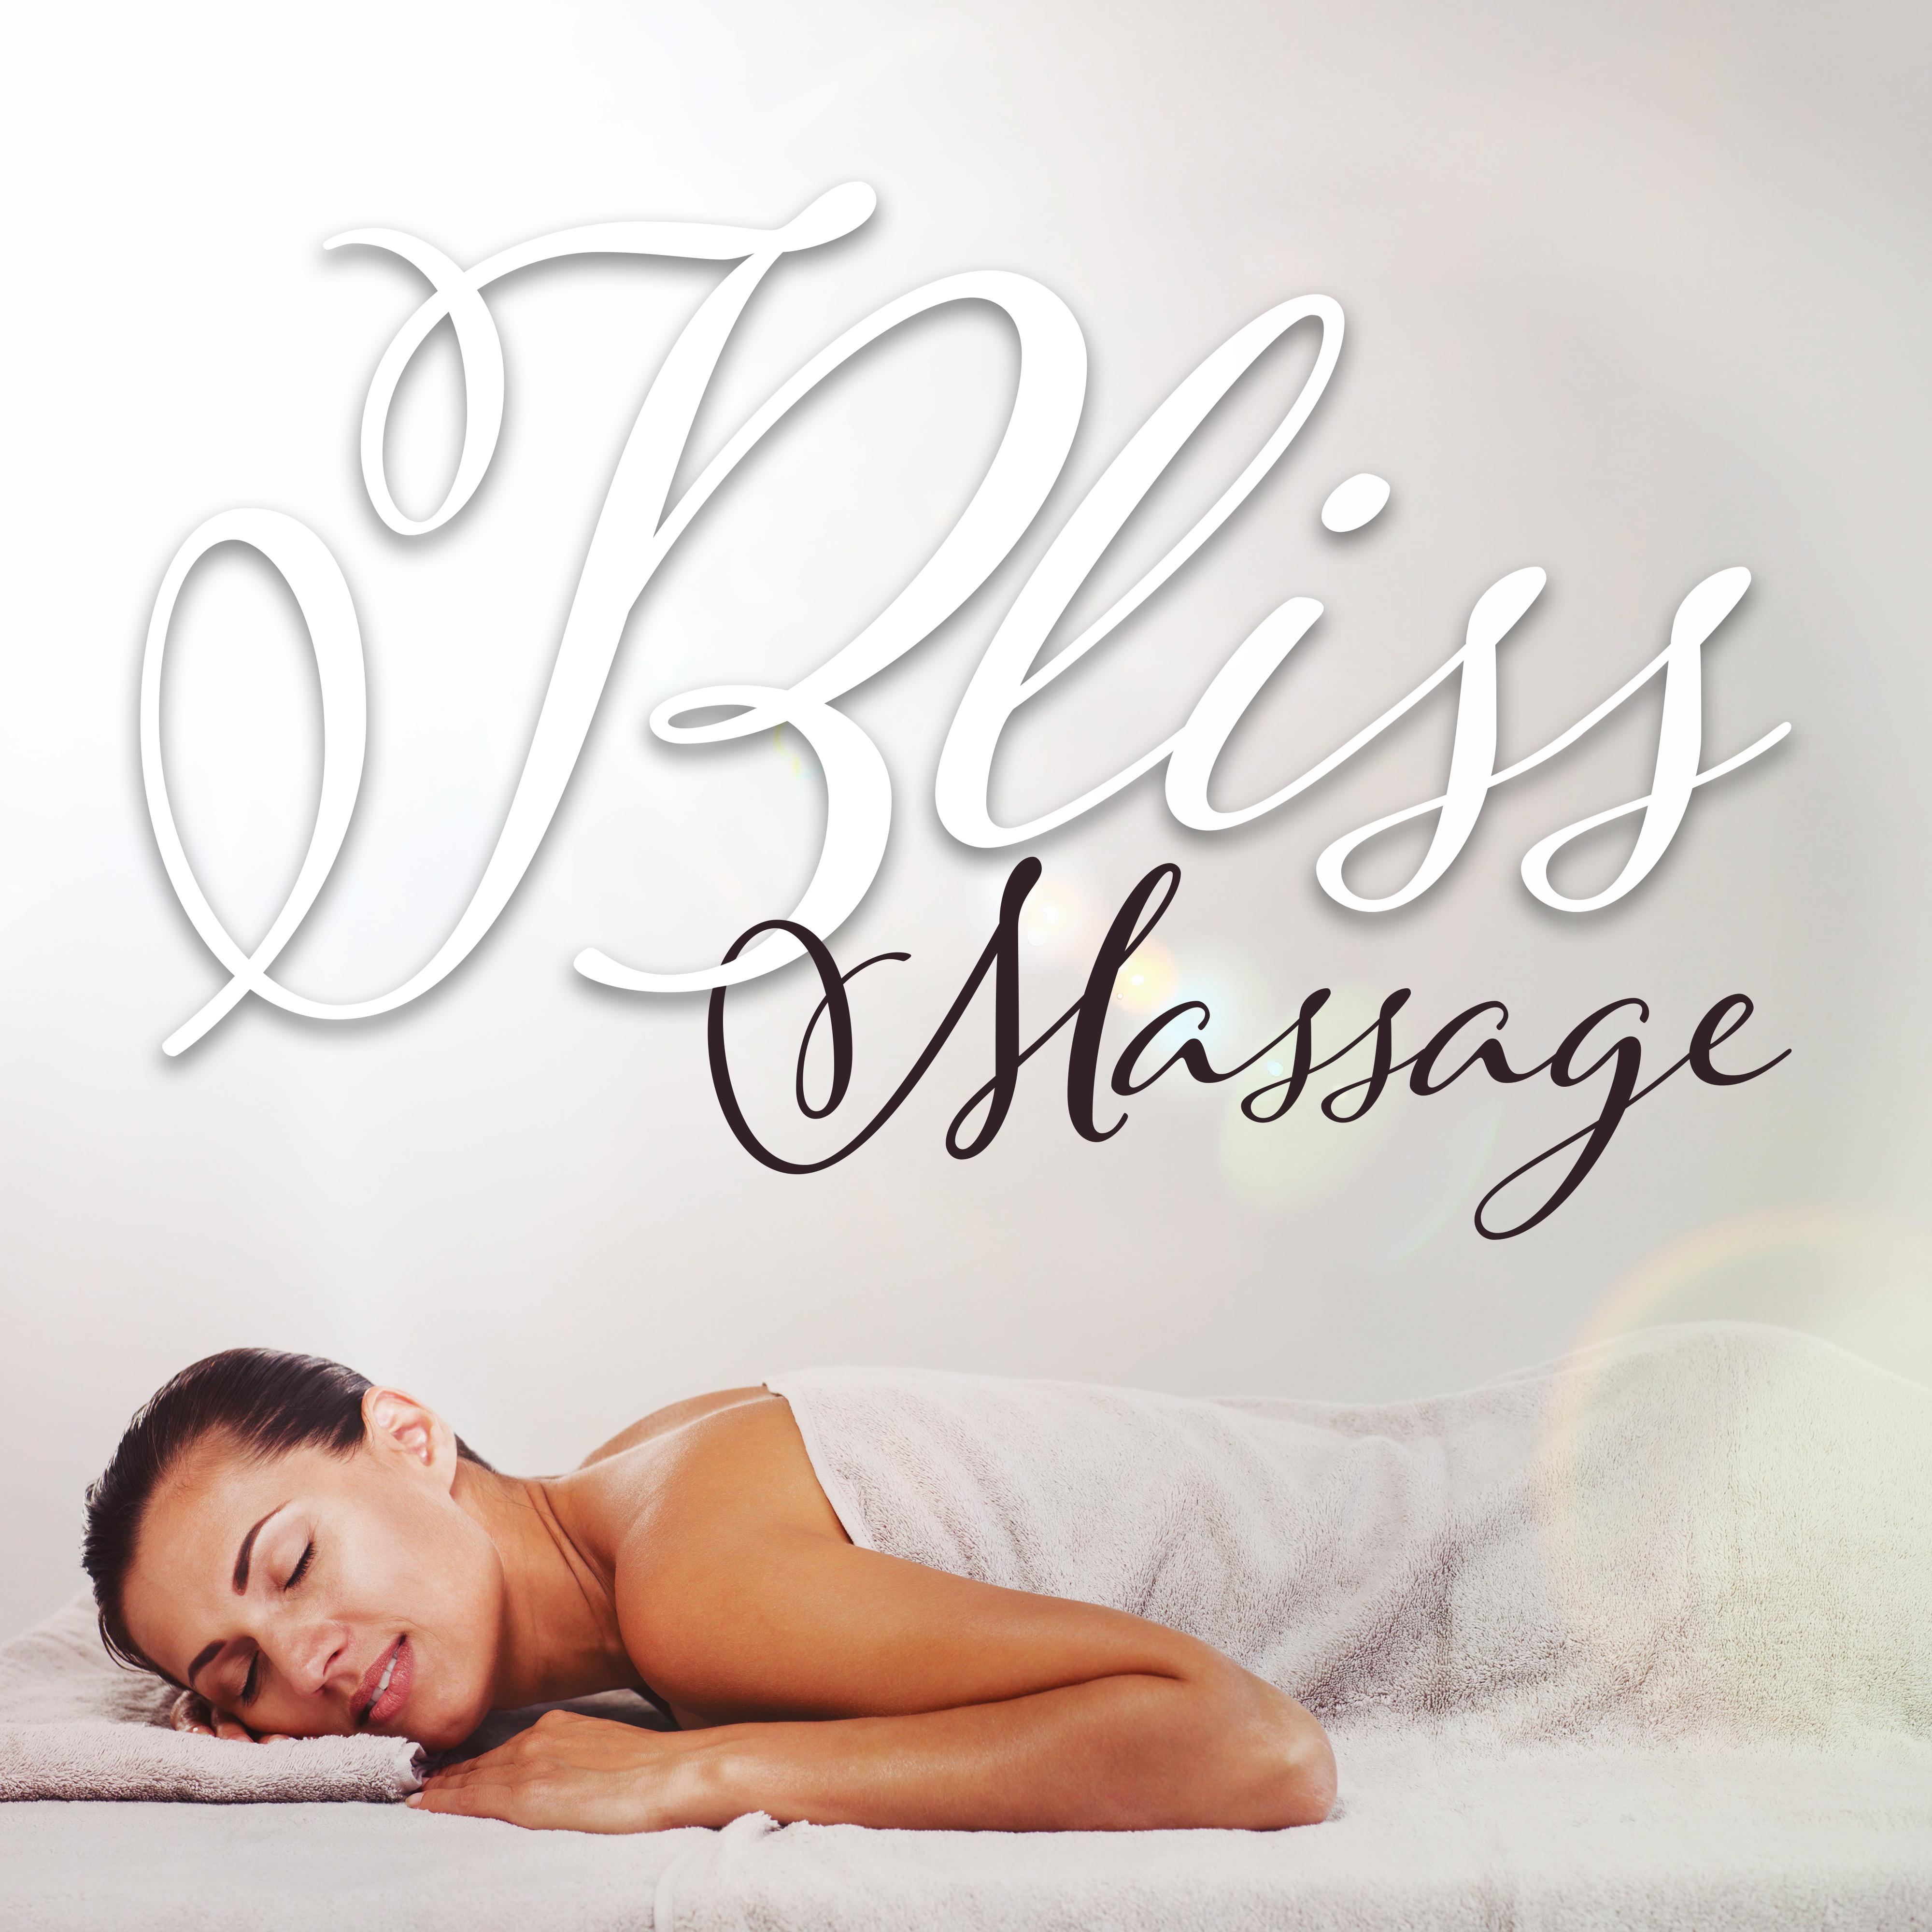 Bliss Massage – Pure Relaxation, Peaceful Nature Sounds, Music for Hotel Spa & Wellness, Massage Background Music